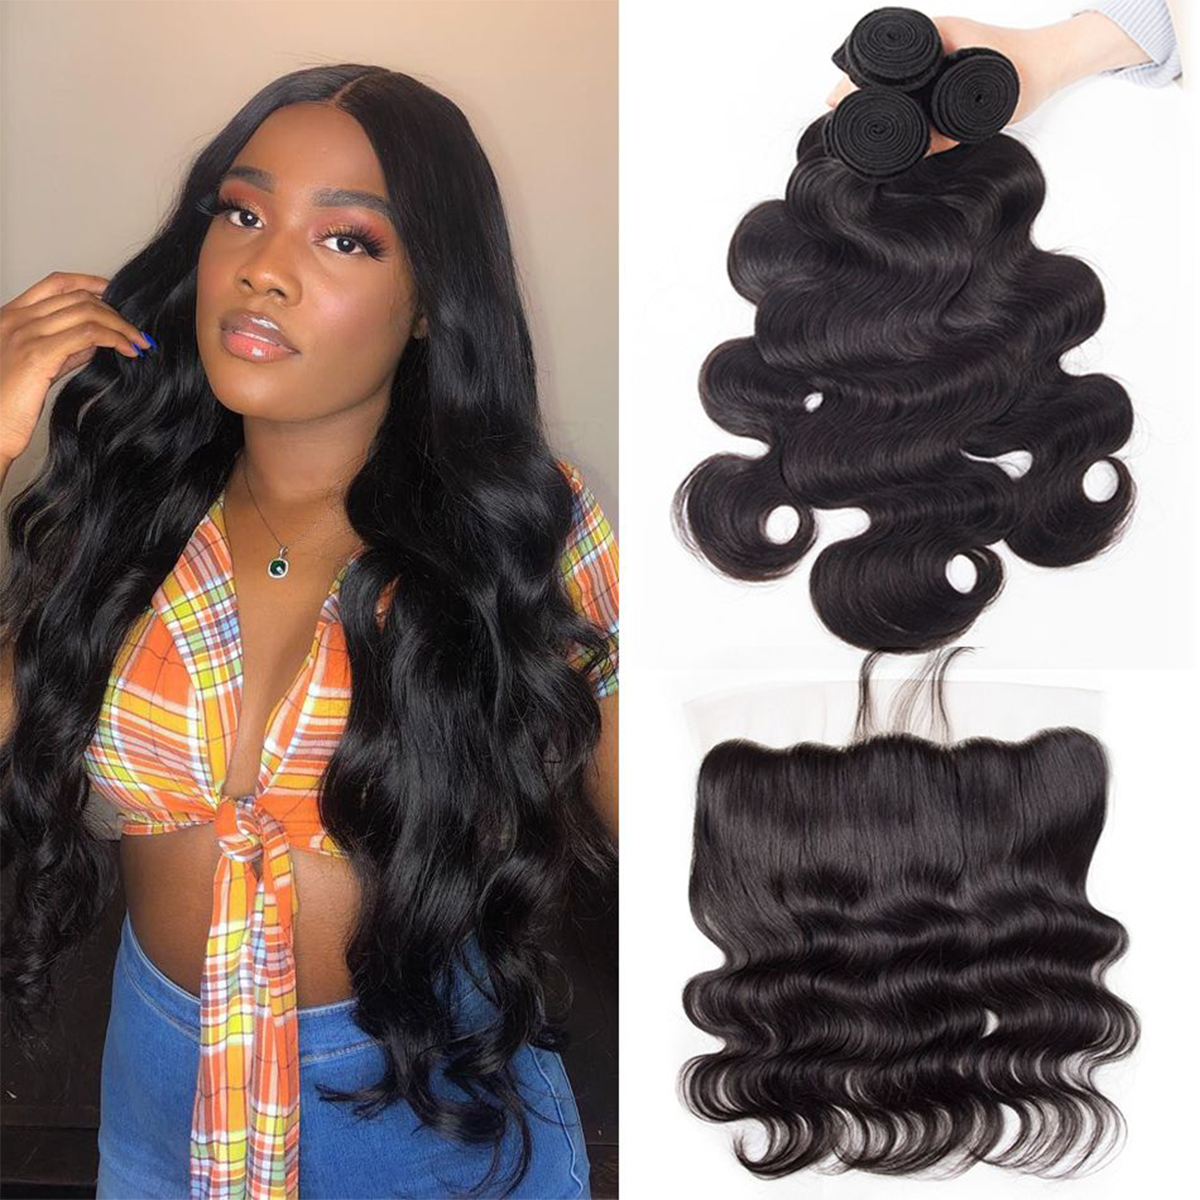 Brazilian Body Wave Hair 3 Bundles With Frontal High Quality Brazilian Virgin Human Hair Lace Frontal Closure With Bundles